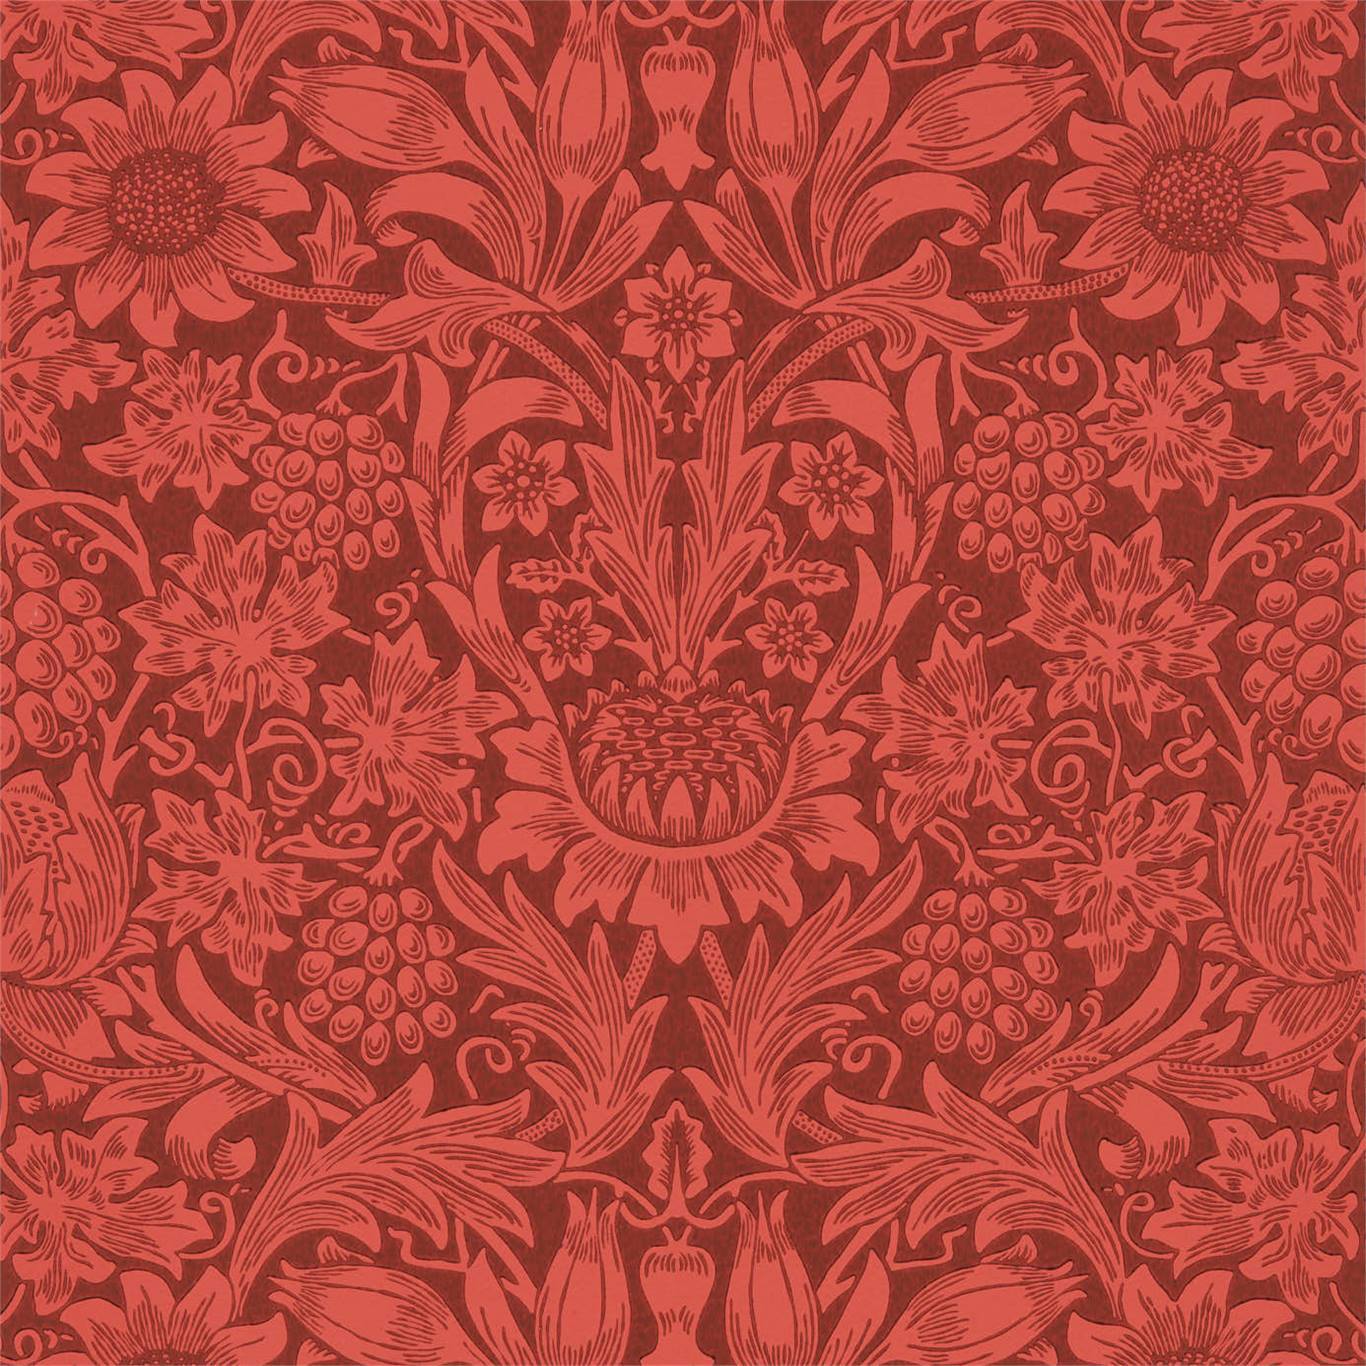 Sunflower Chocolate/Red Wallpaper DBPW216960 by Morris & Co